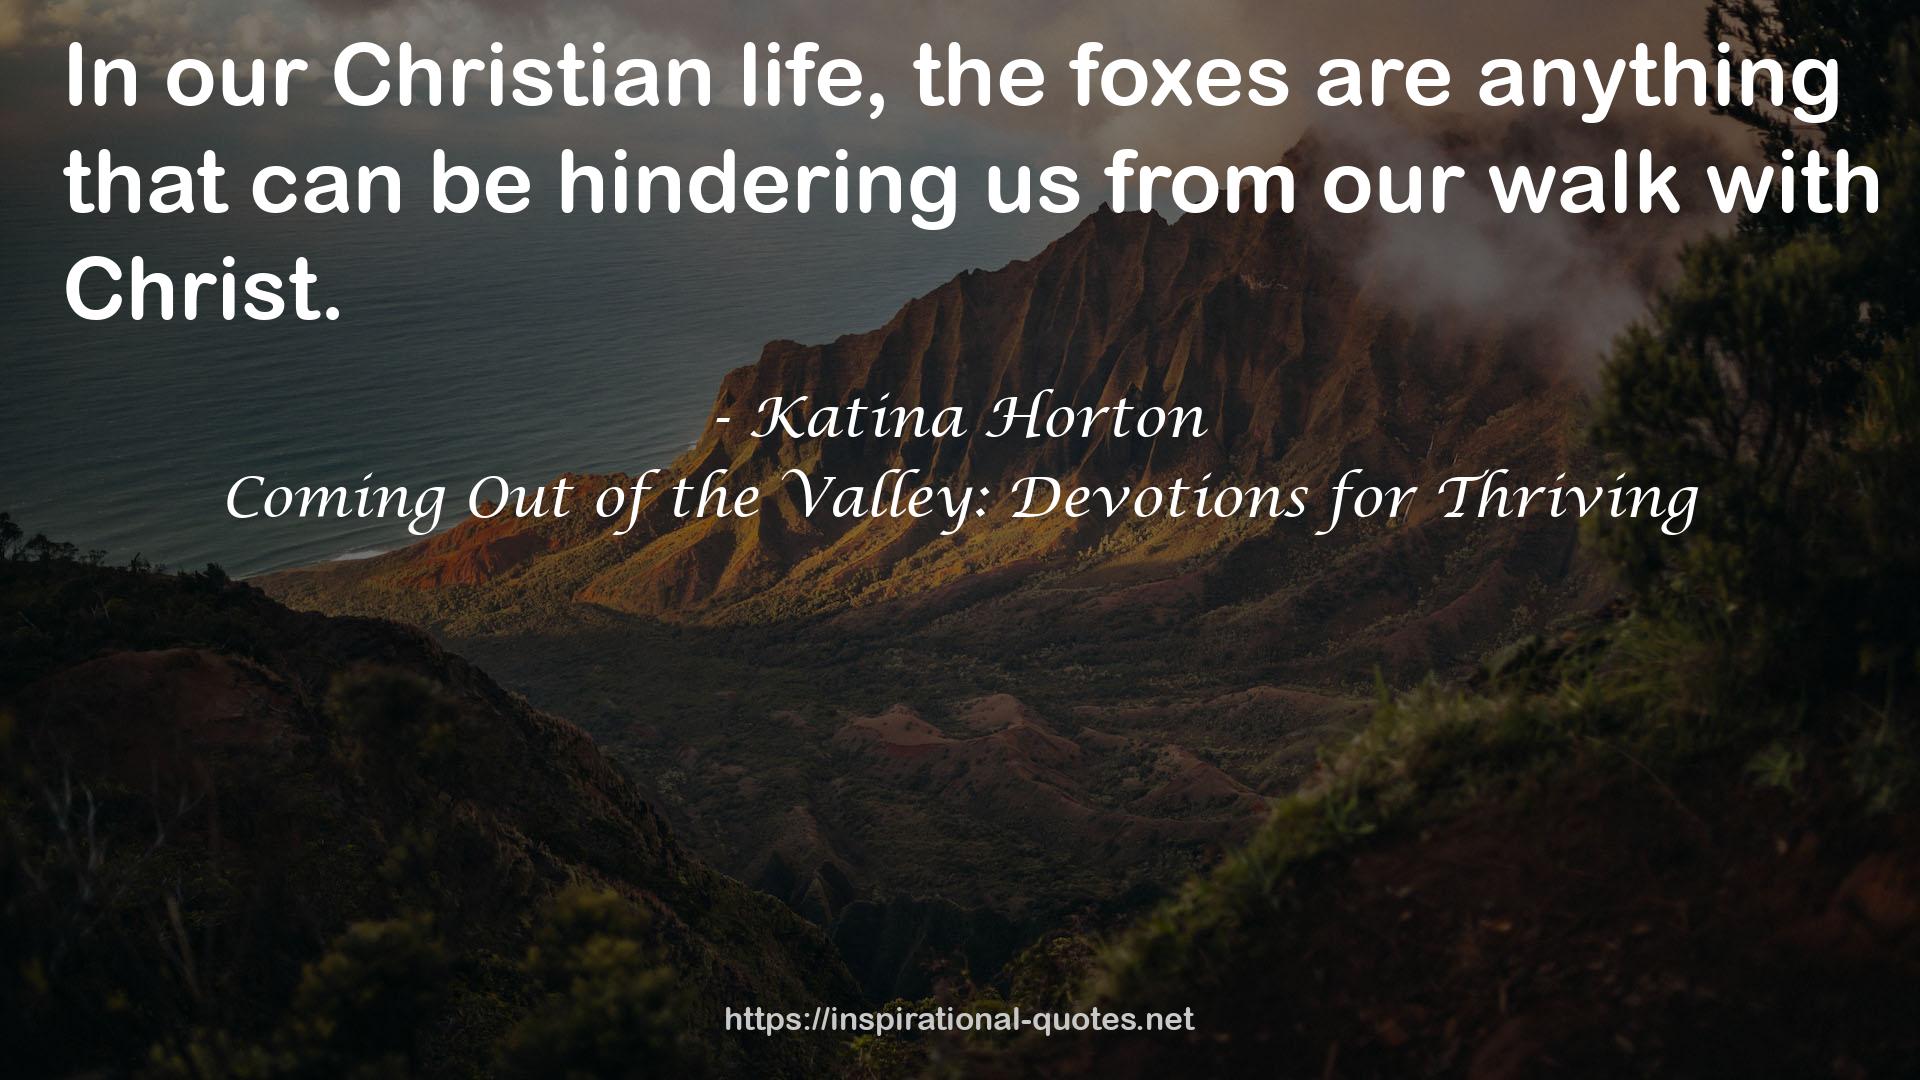 Coming Out of the Valley: Devotions for Thriving QUOTES